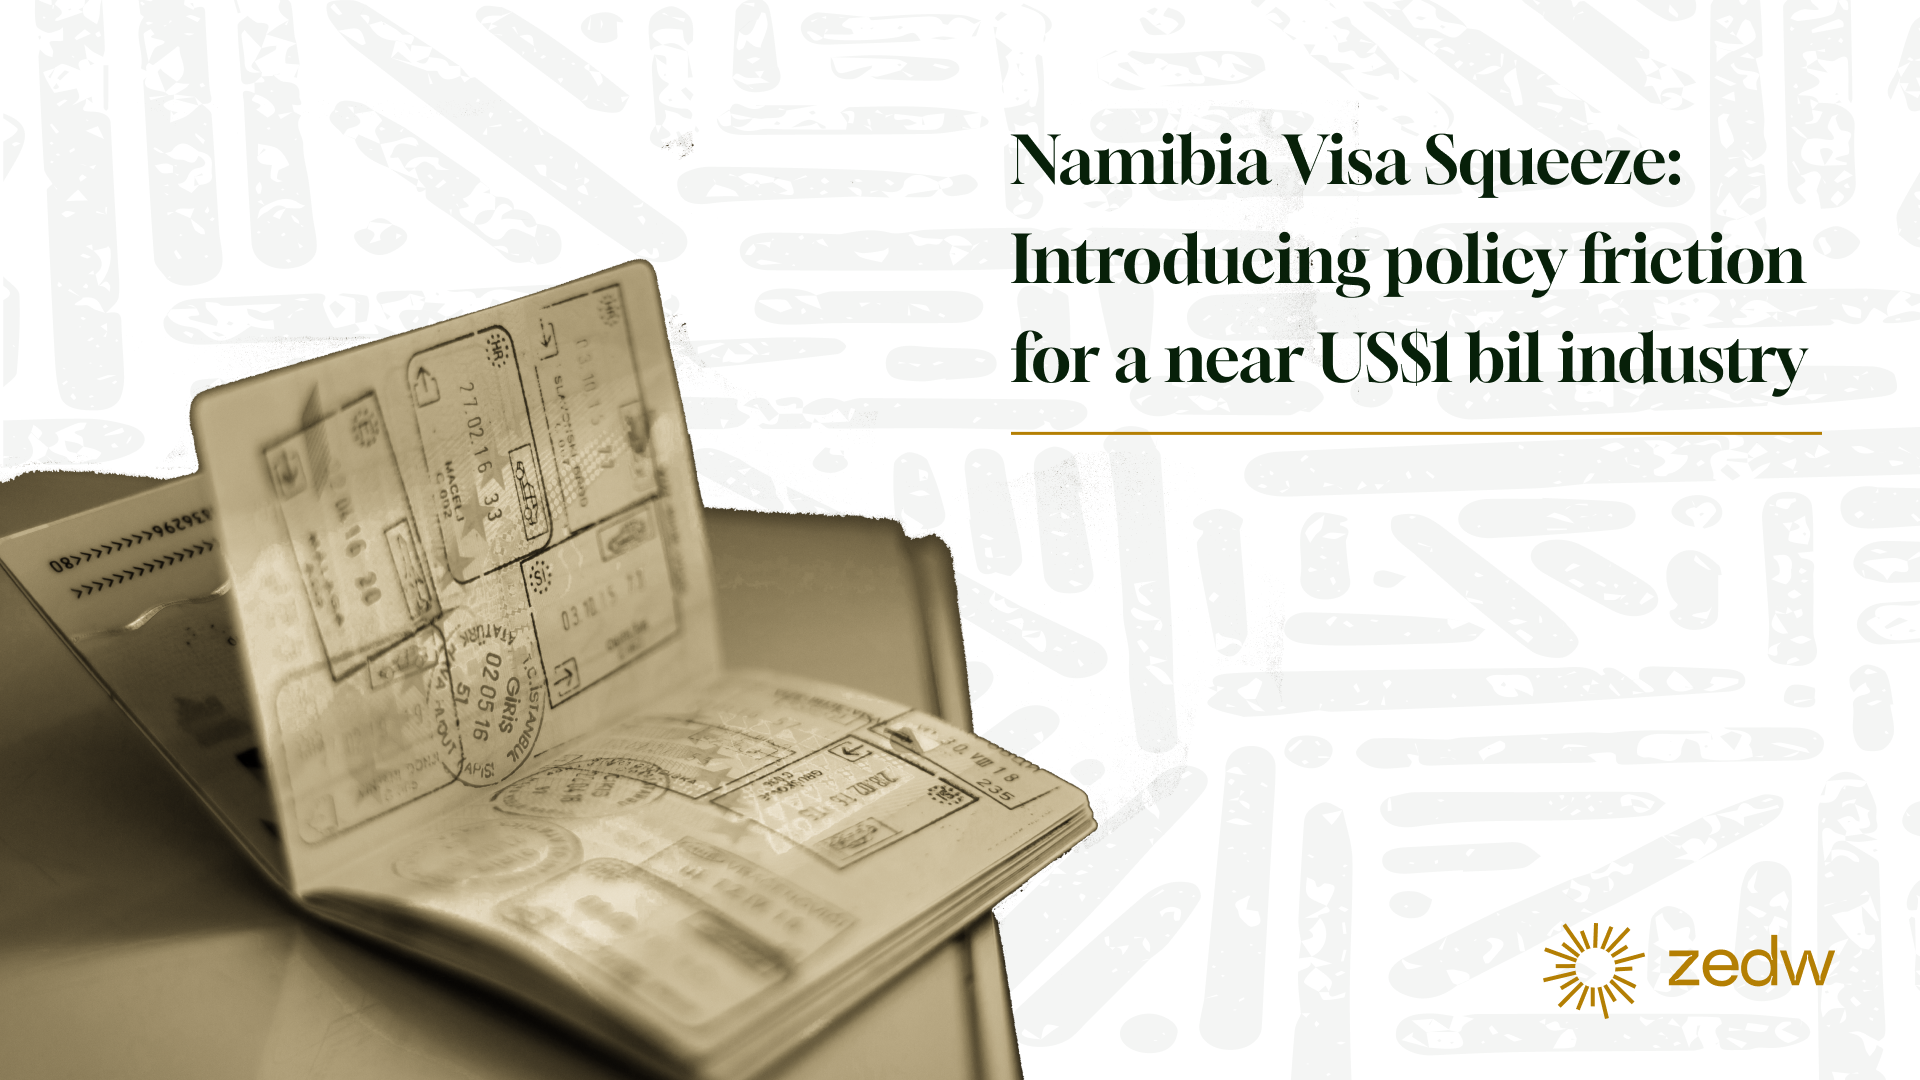 Namibia Visa Squeeze: Introducing policy friction to a near US$1 bil industry